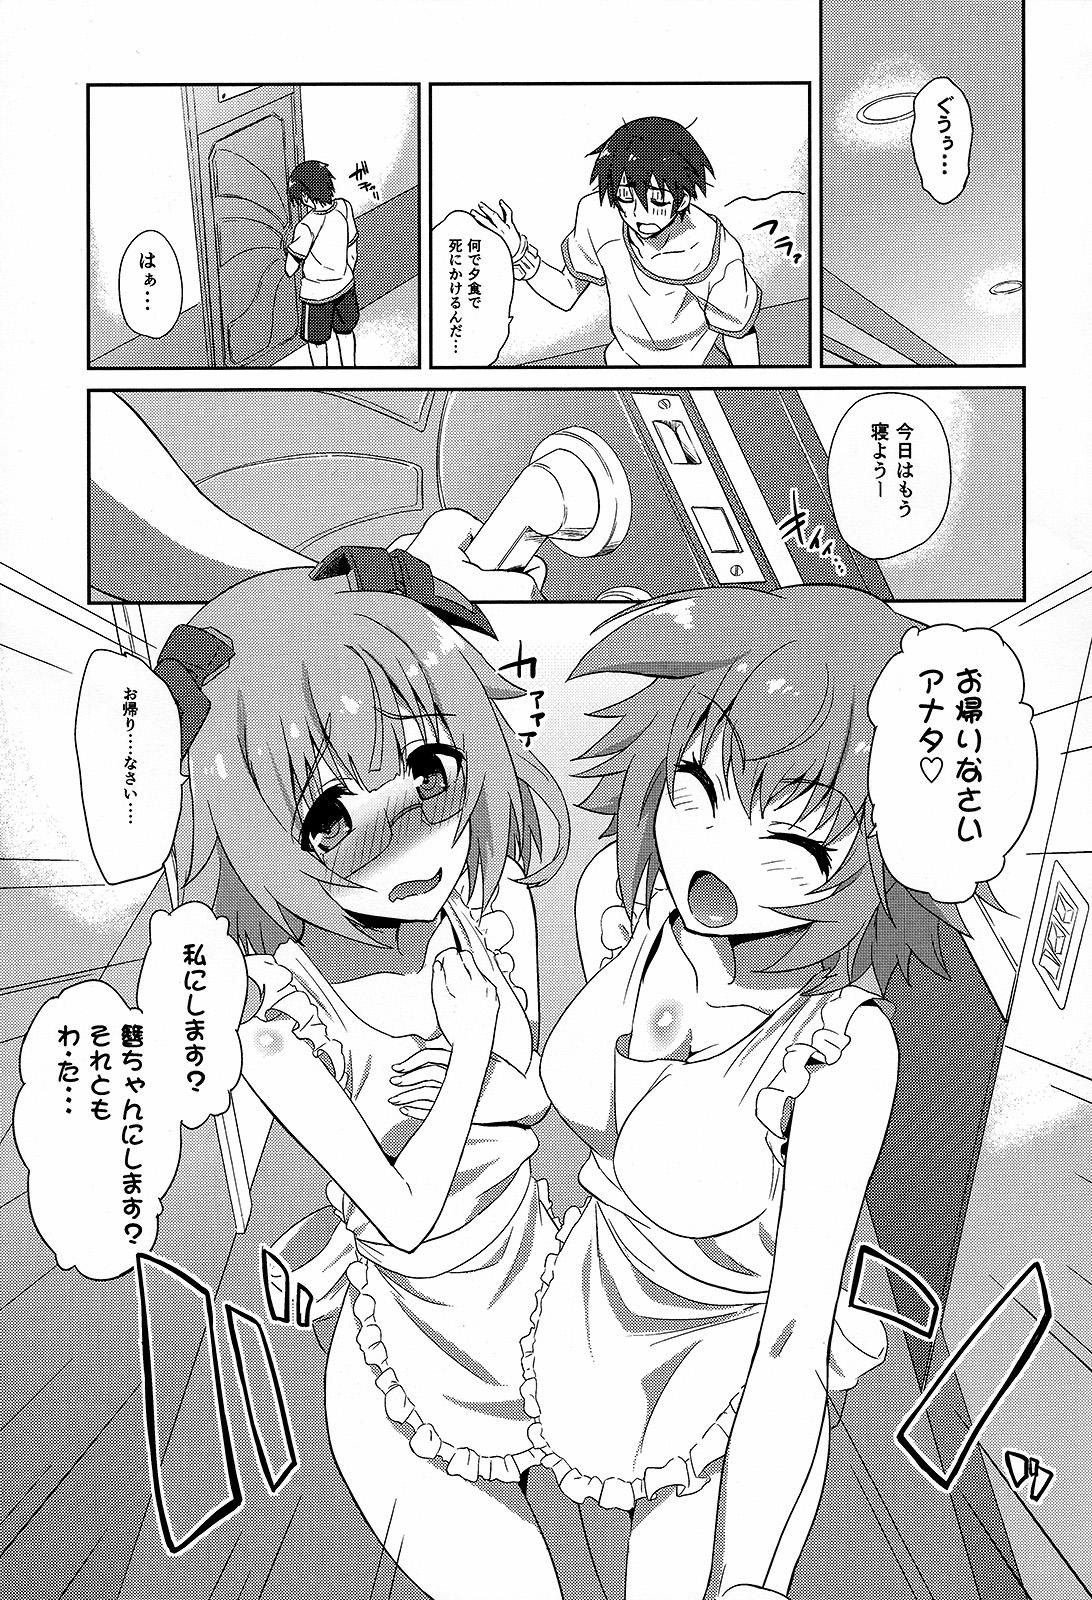 Tanned IS ICHIKA LOVE SISTERS!! - Infinite stratos Hot Girl Porn - Page 2